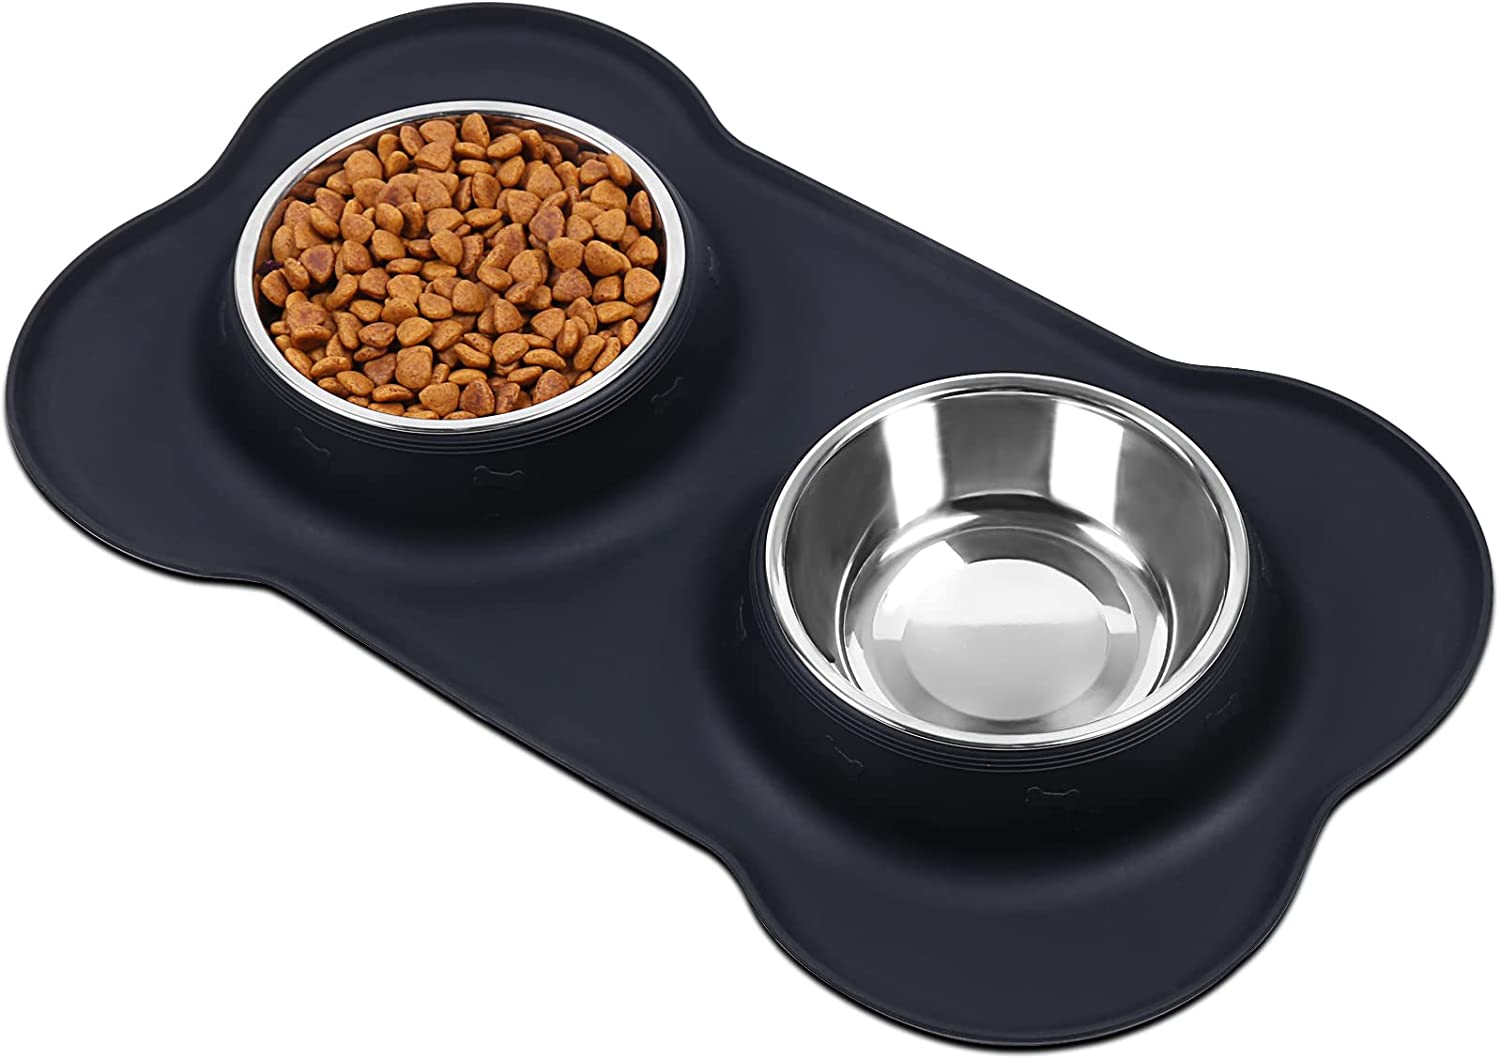 VIVAGLORY Dog Bowls with Non Spill/Skid Resistant Silicone Mat